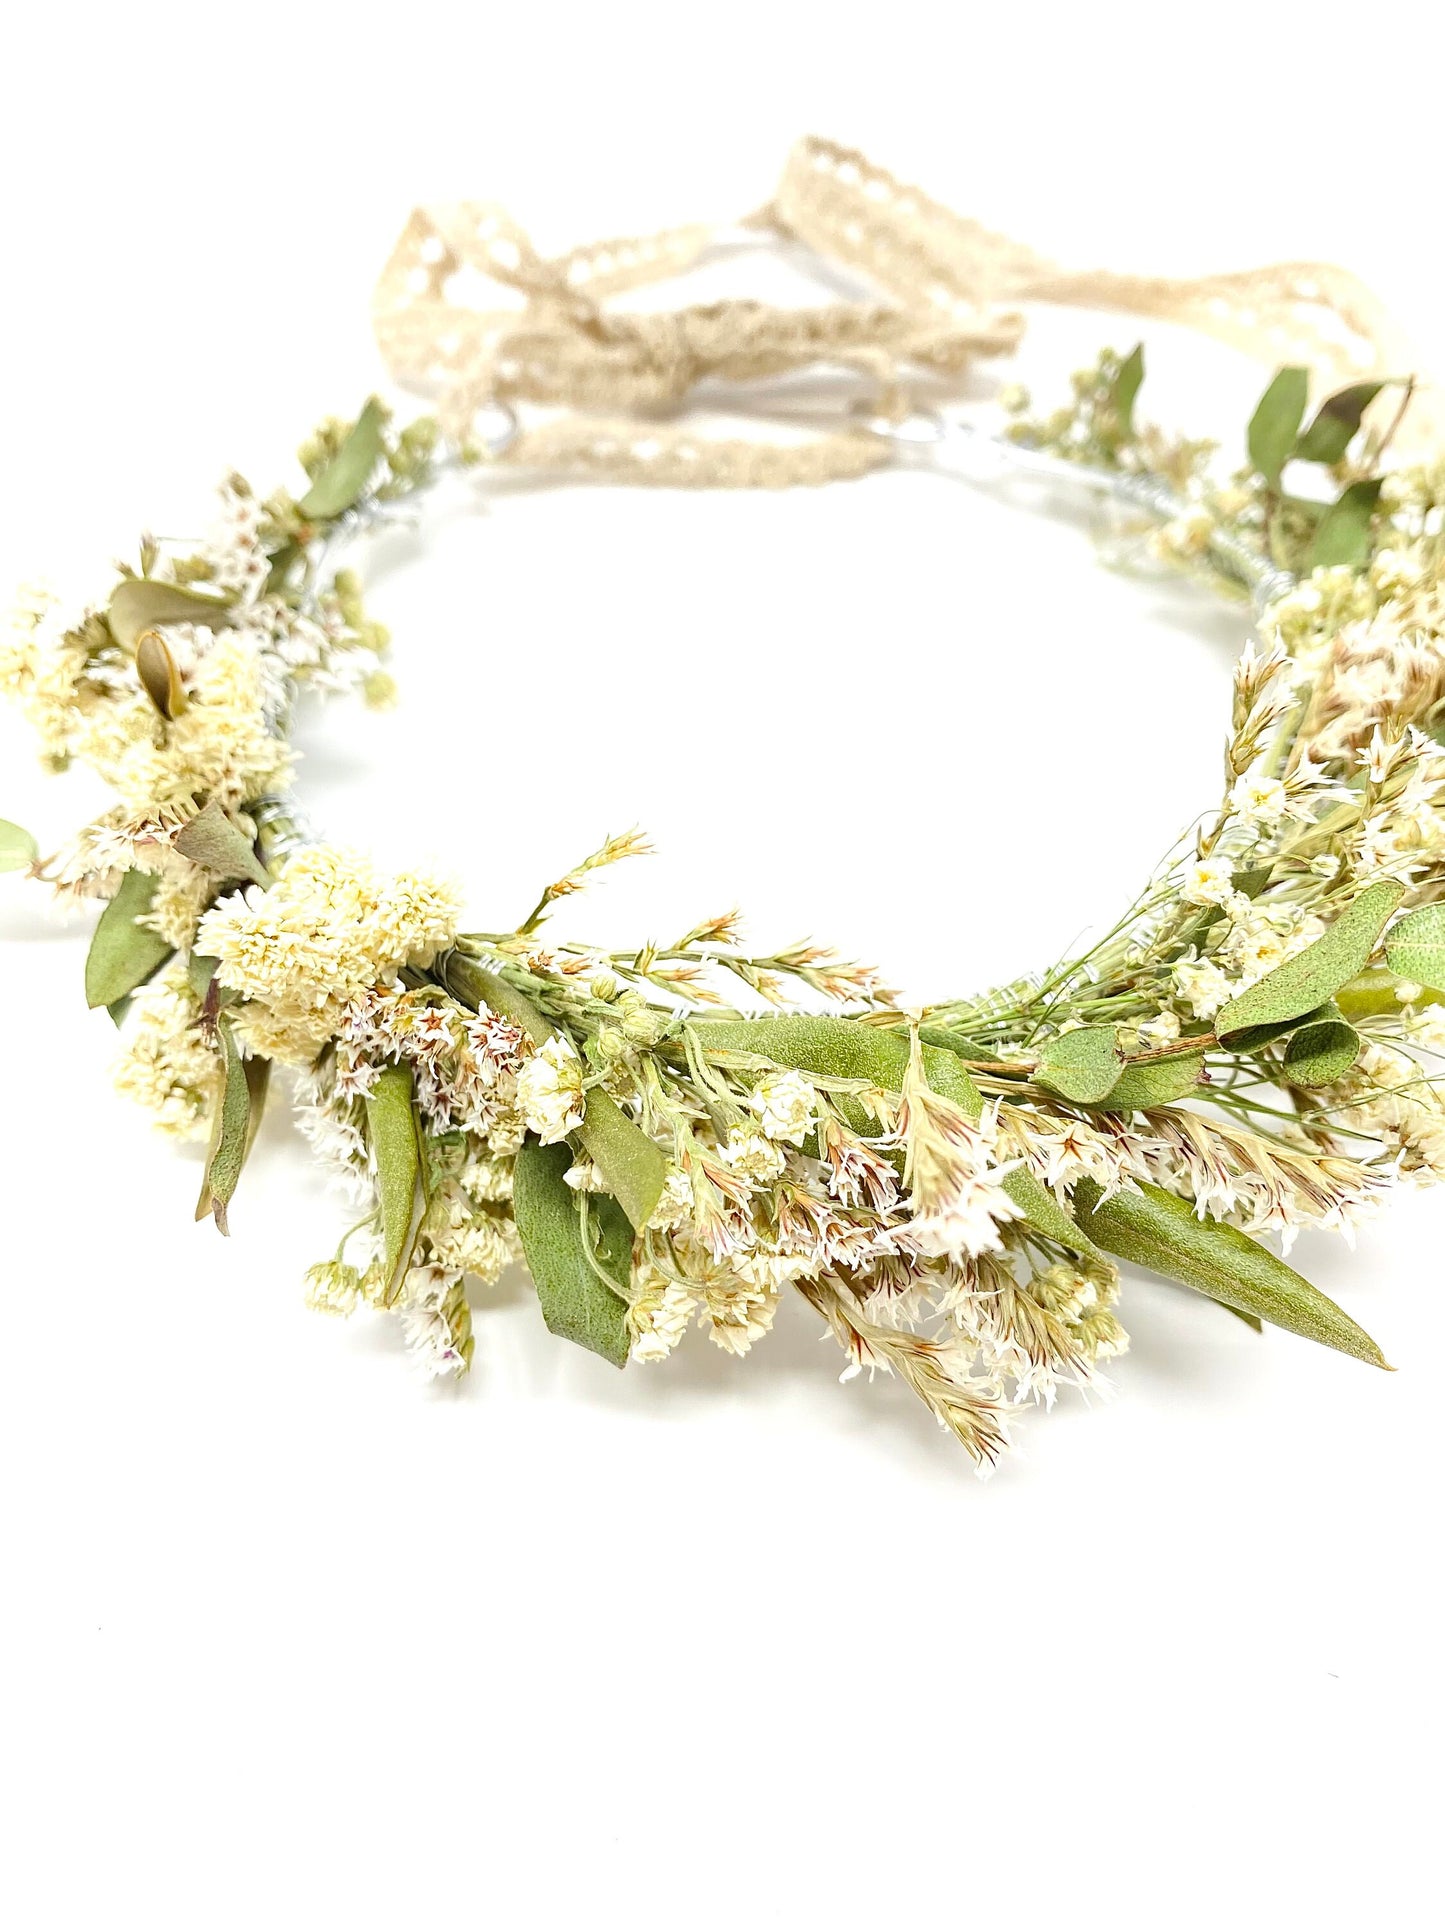 Wedding Head Wreath, Dried Flowers, Preserved Floral, Hair Accessories, Bridal, Greenery, Green and White Crown, German Statice, Photoshoot